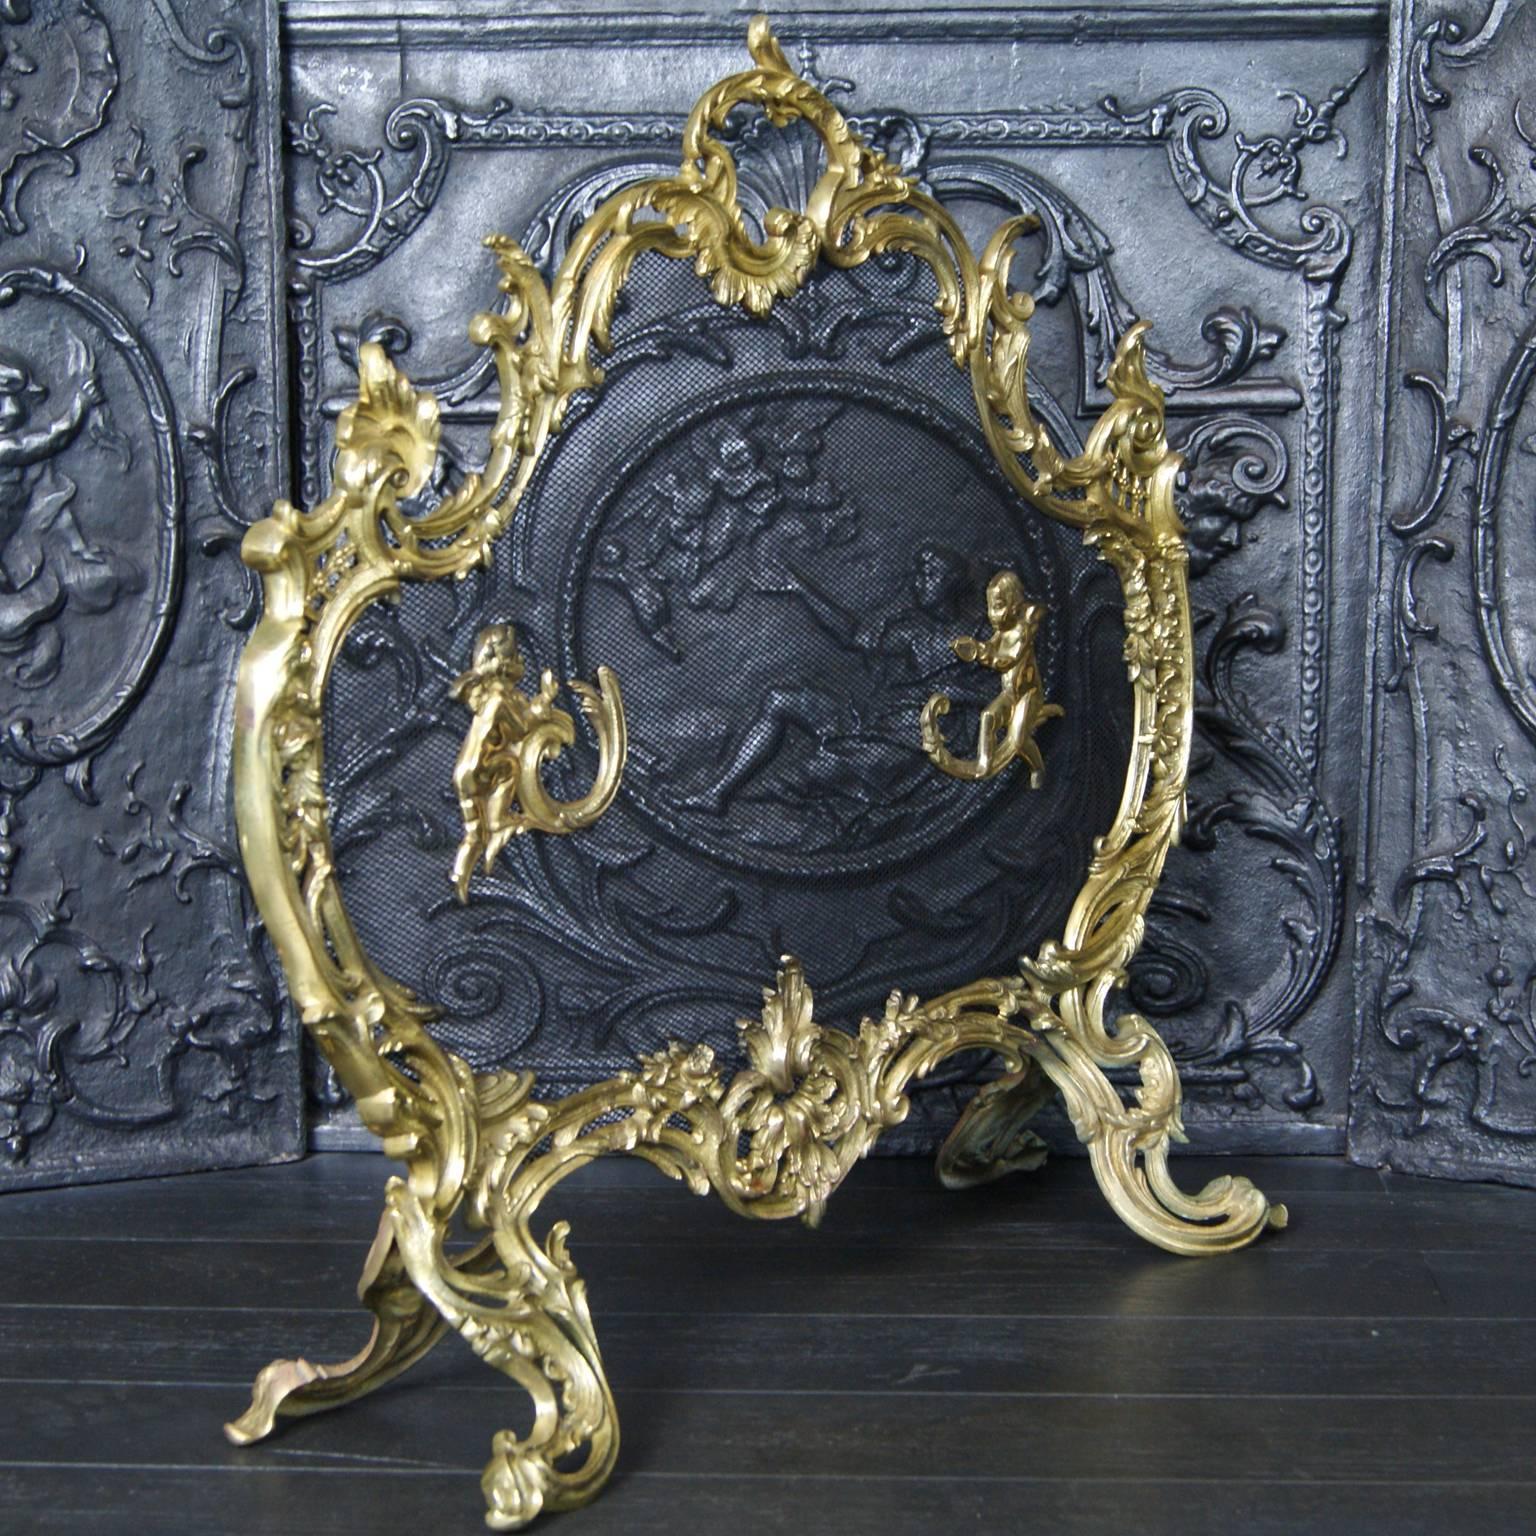 A gilt brass Rococo fire screen. The frame with foliage and scrolling details. Two cherubs sit on the spark mesh.